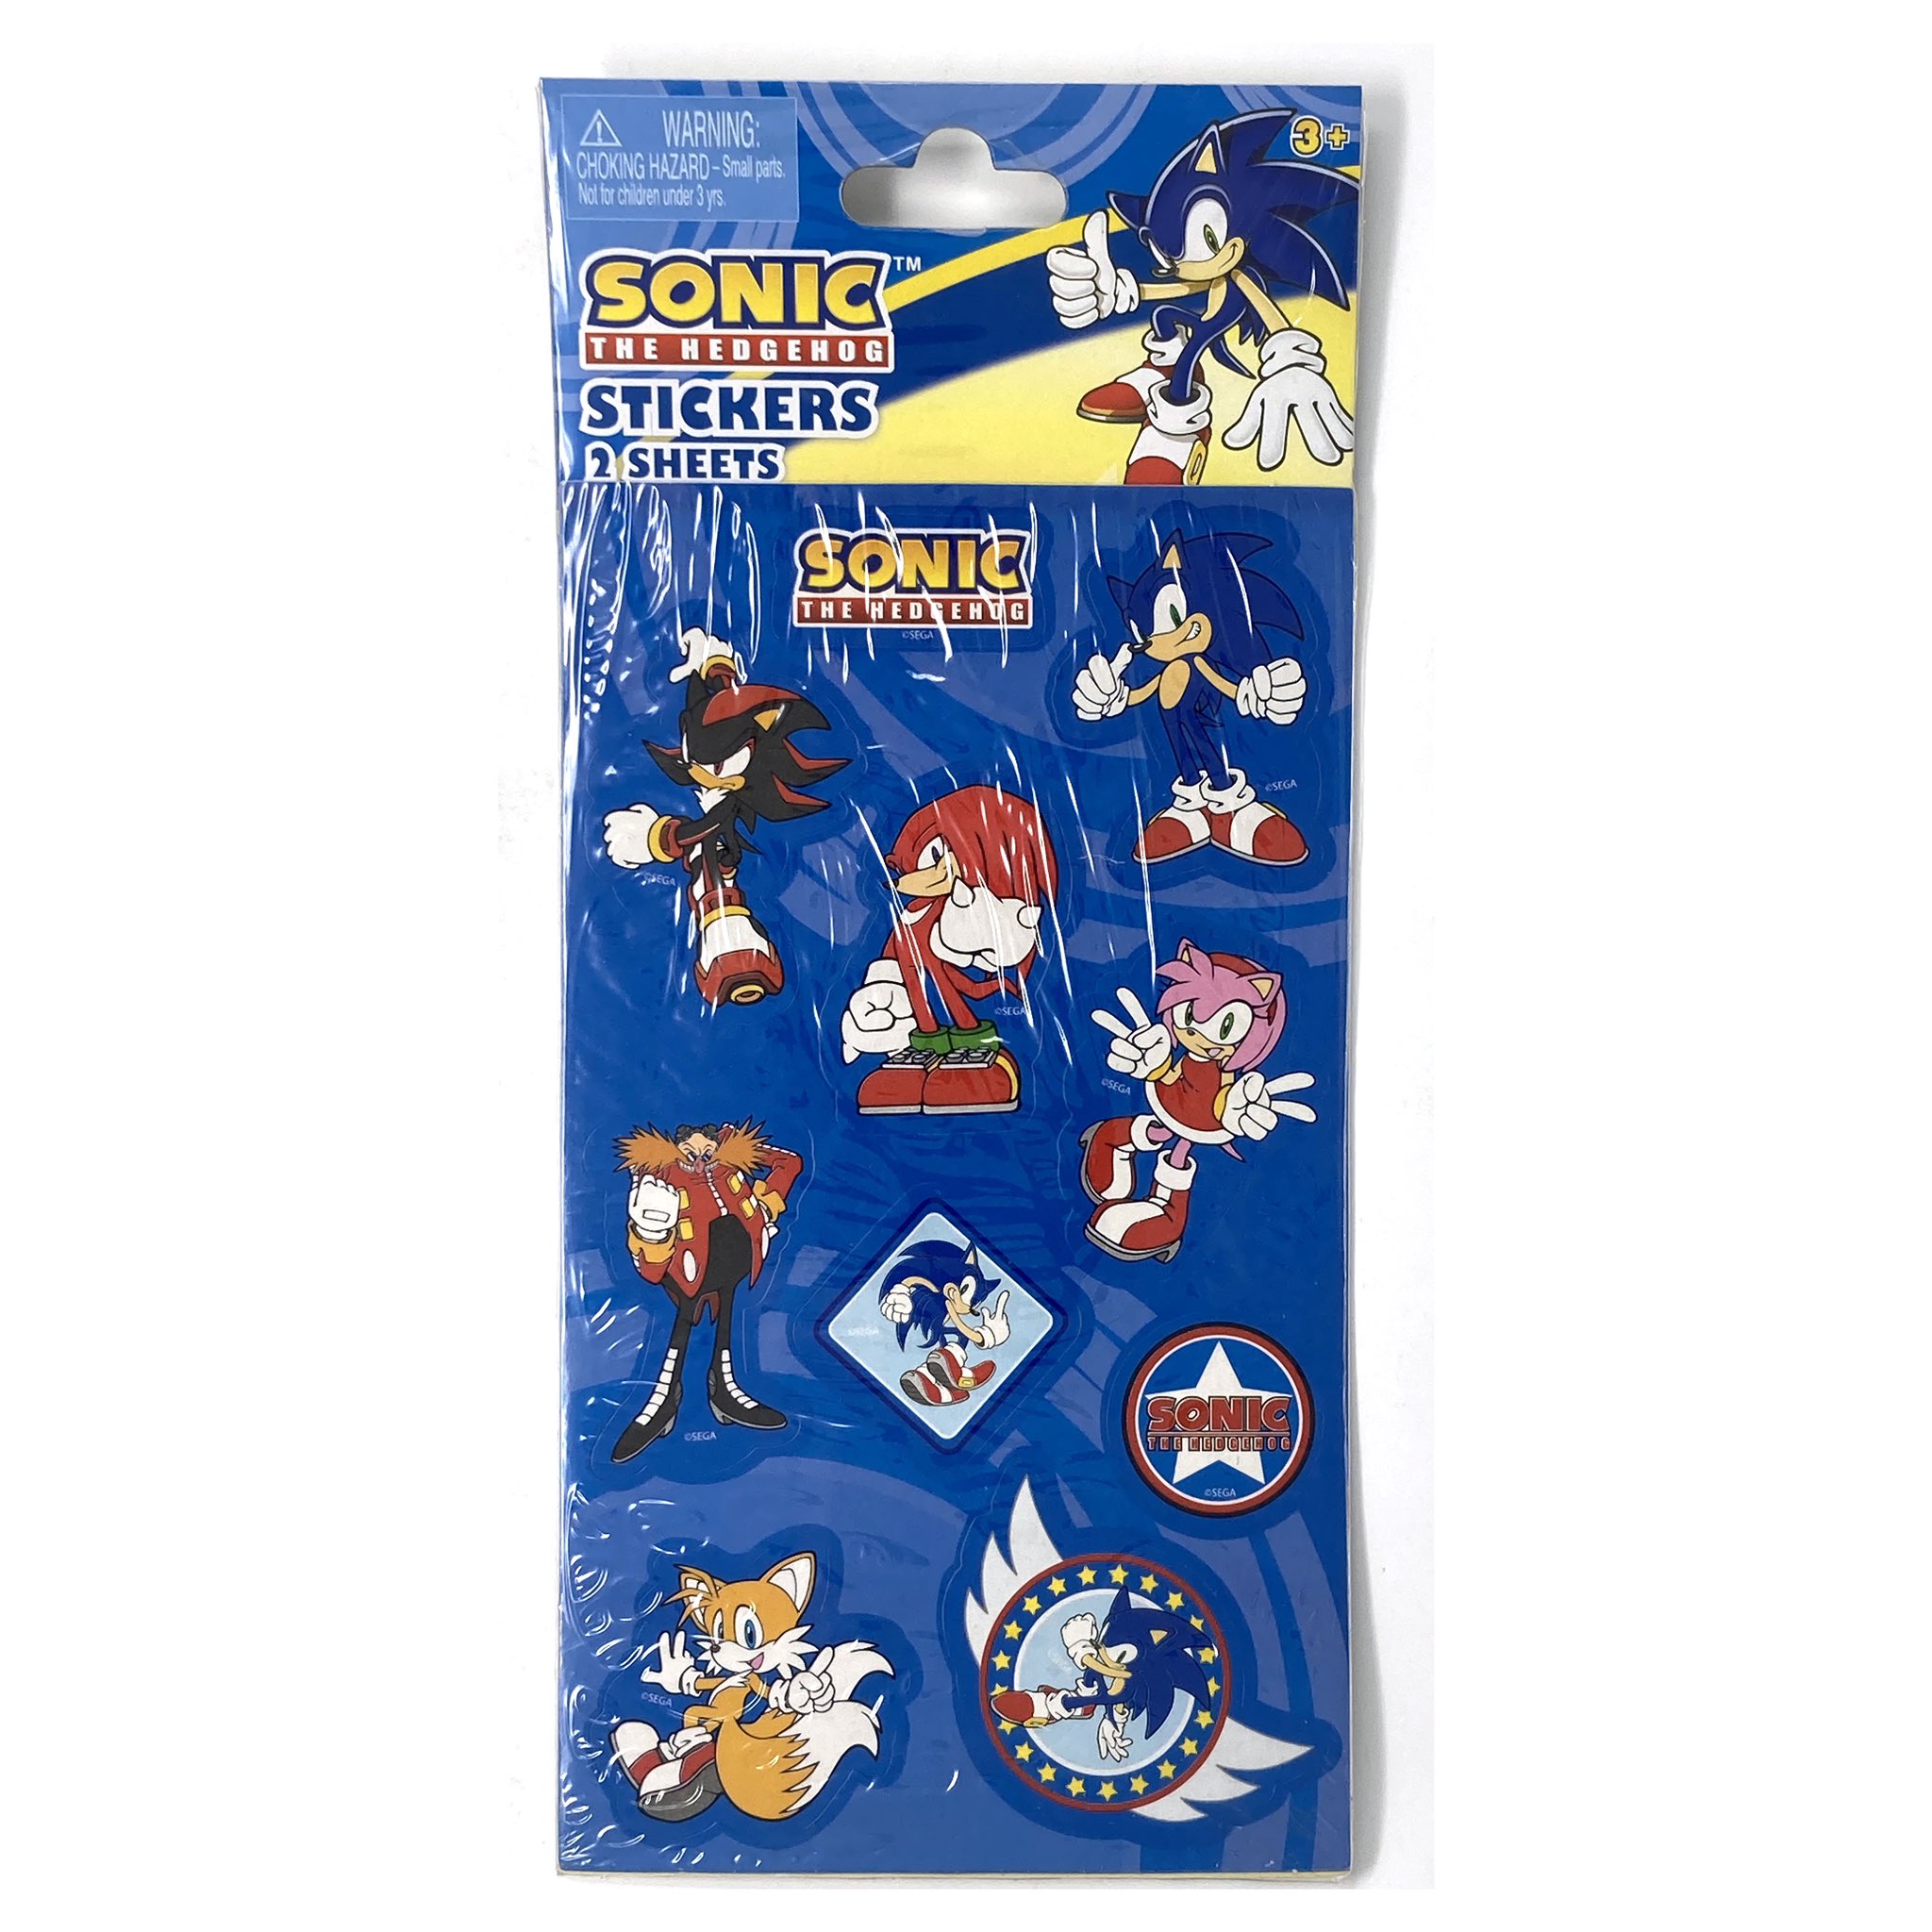 Sonic the Hedgehog 2 Movie Tails 4 Inch Action Figure – Insert Coin Toys